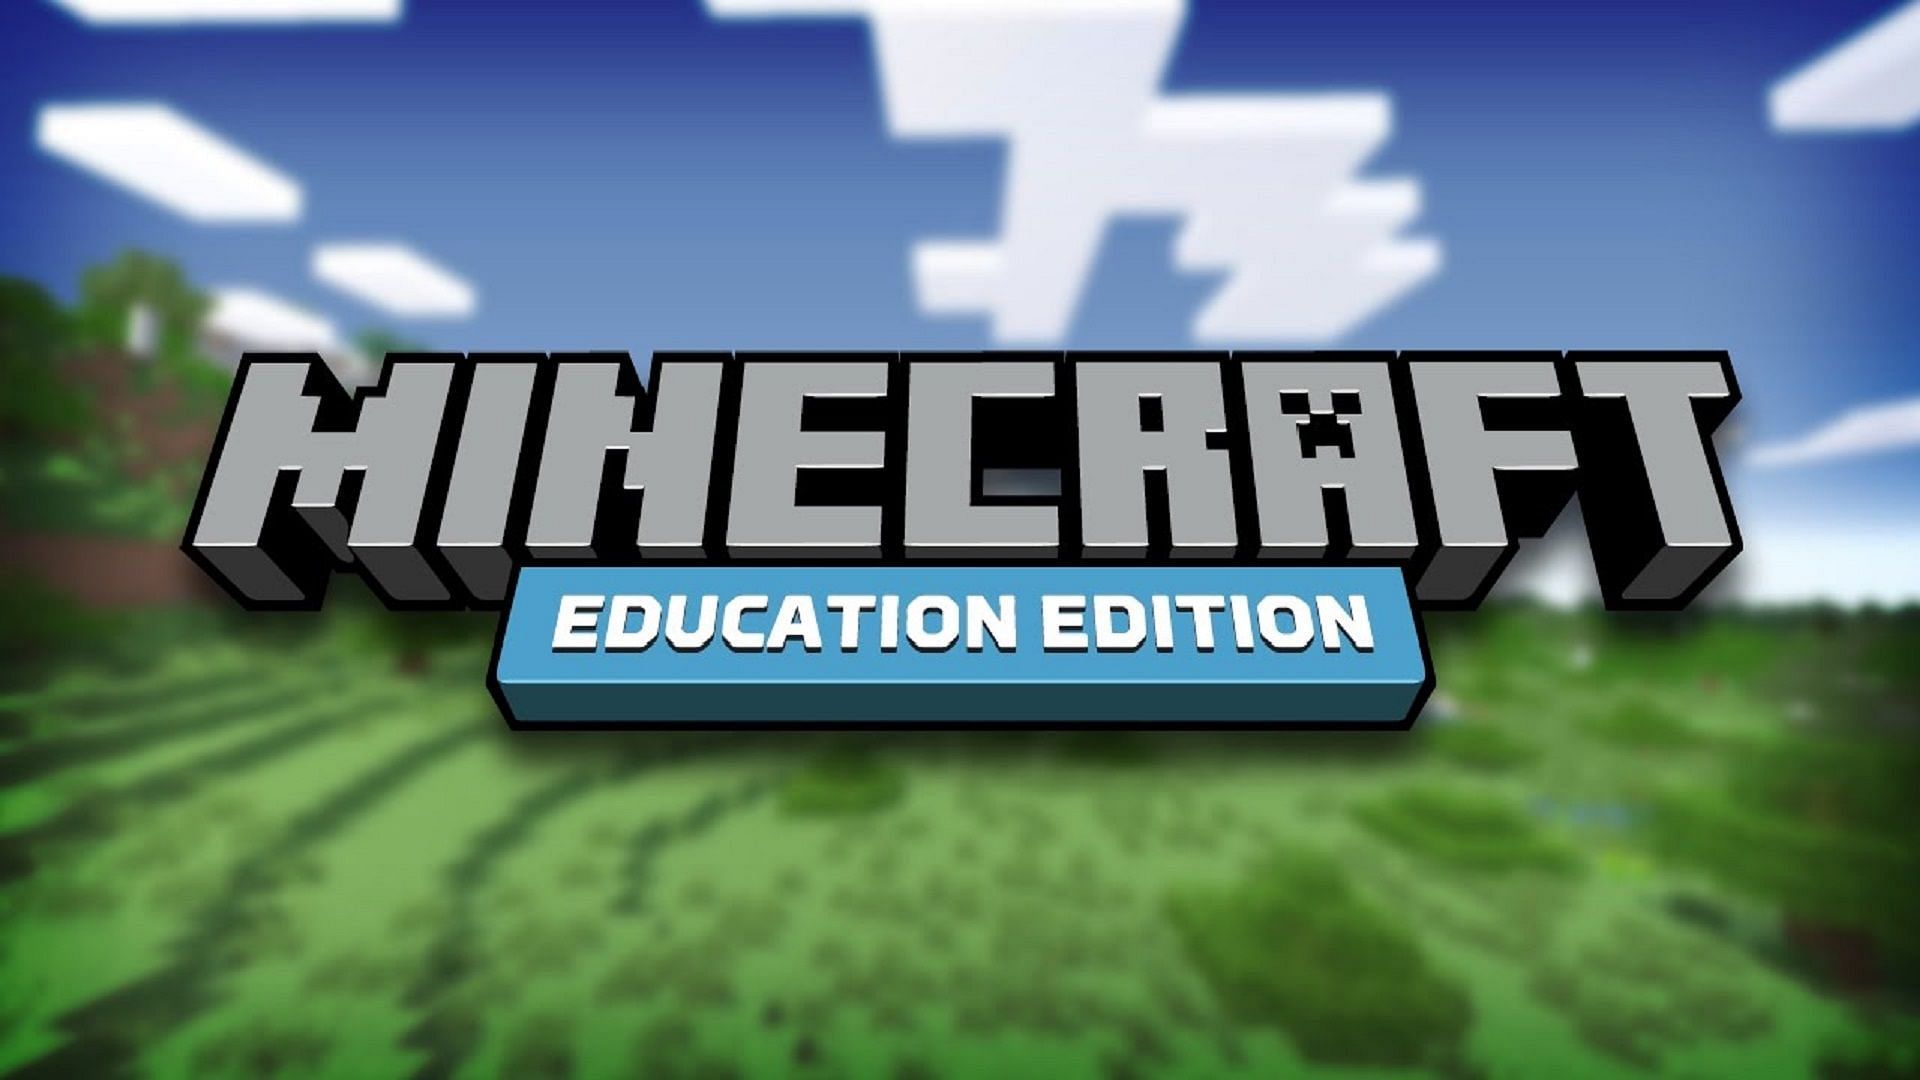 PC/Mac: Downloading Minecraft EE Lessons From Google Classroom